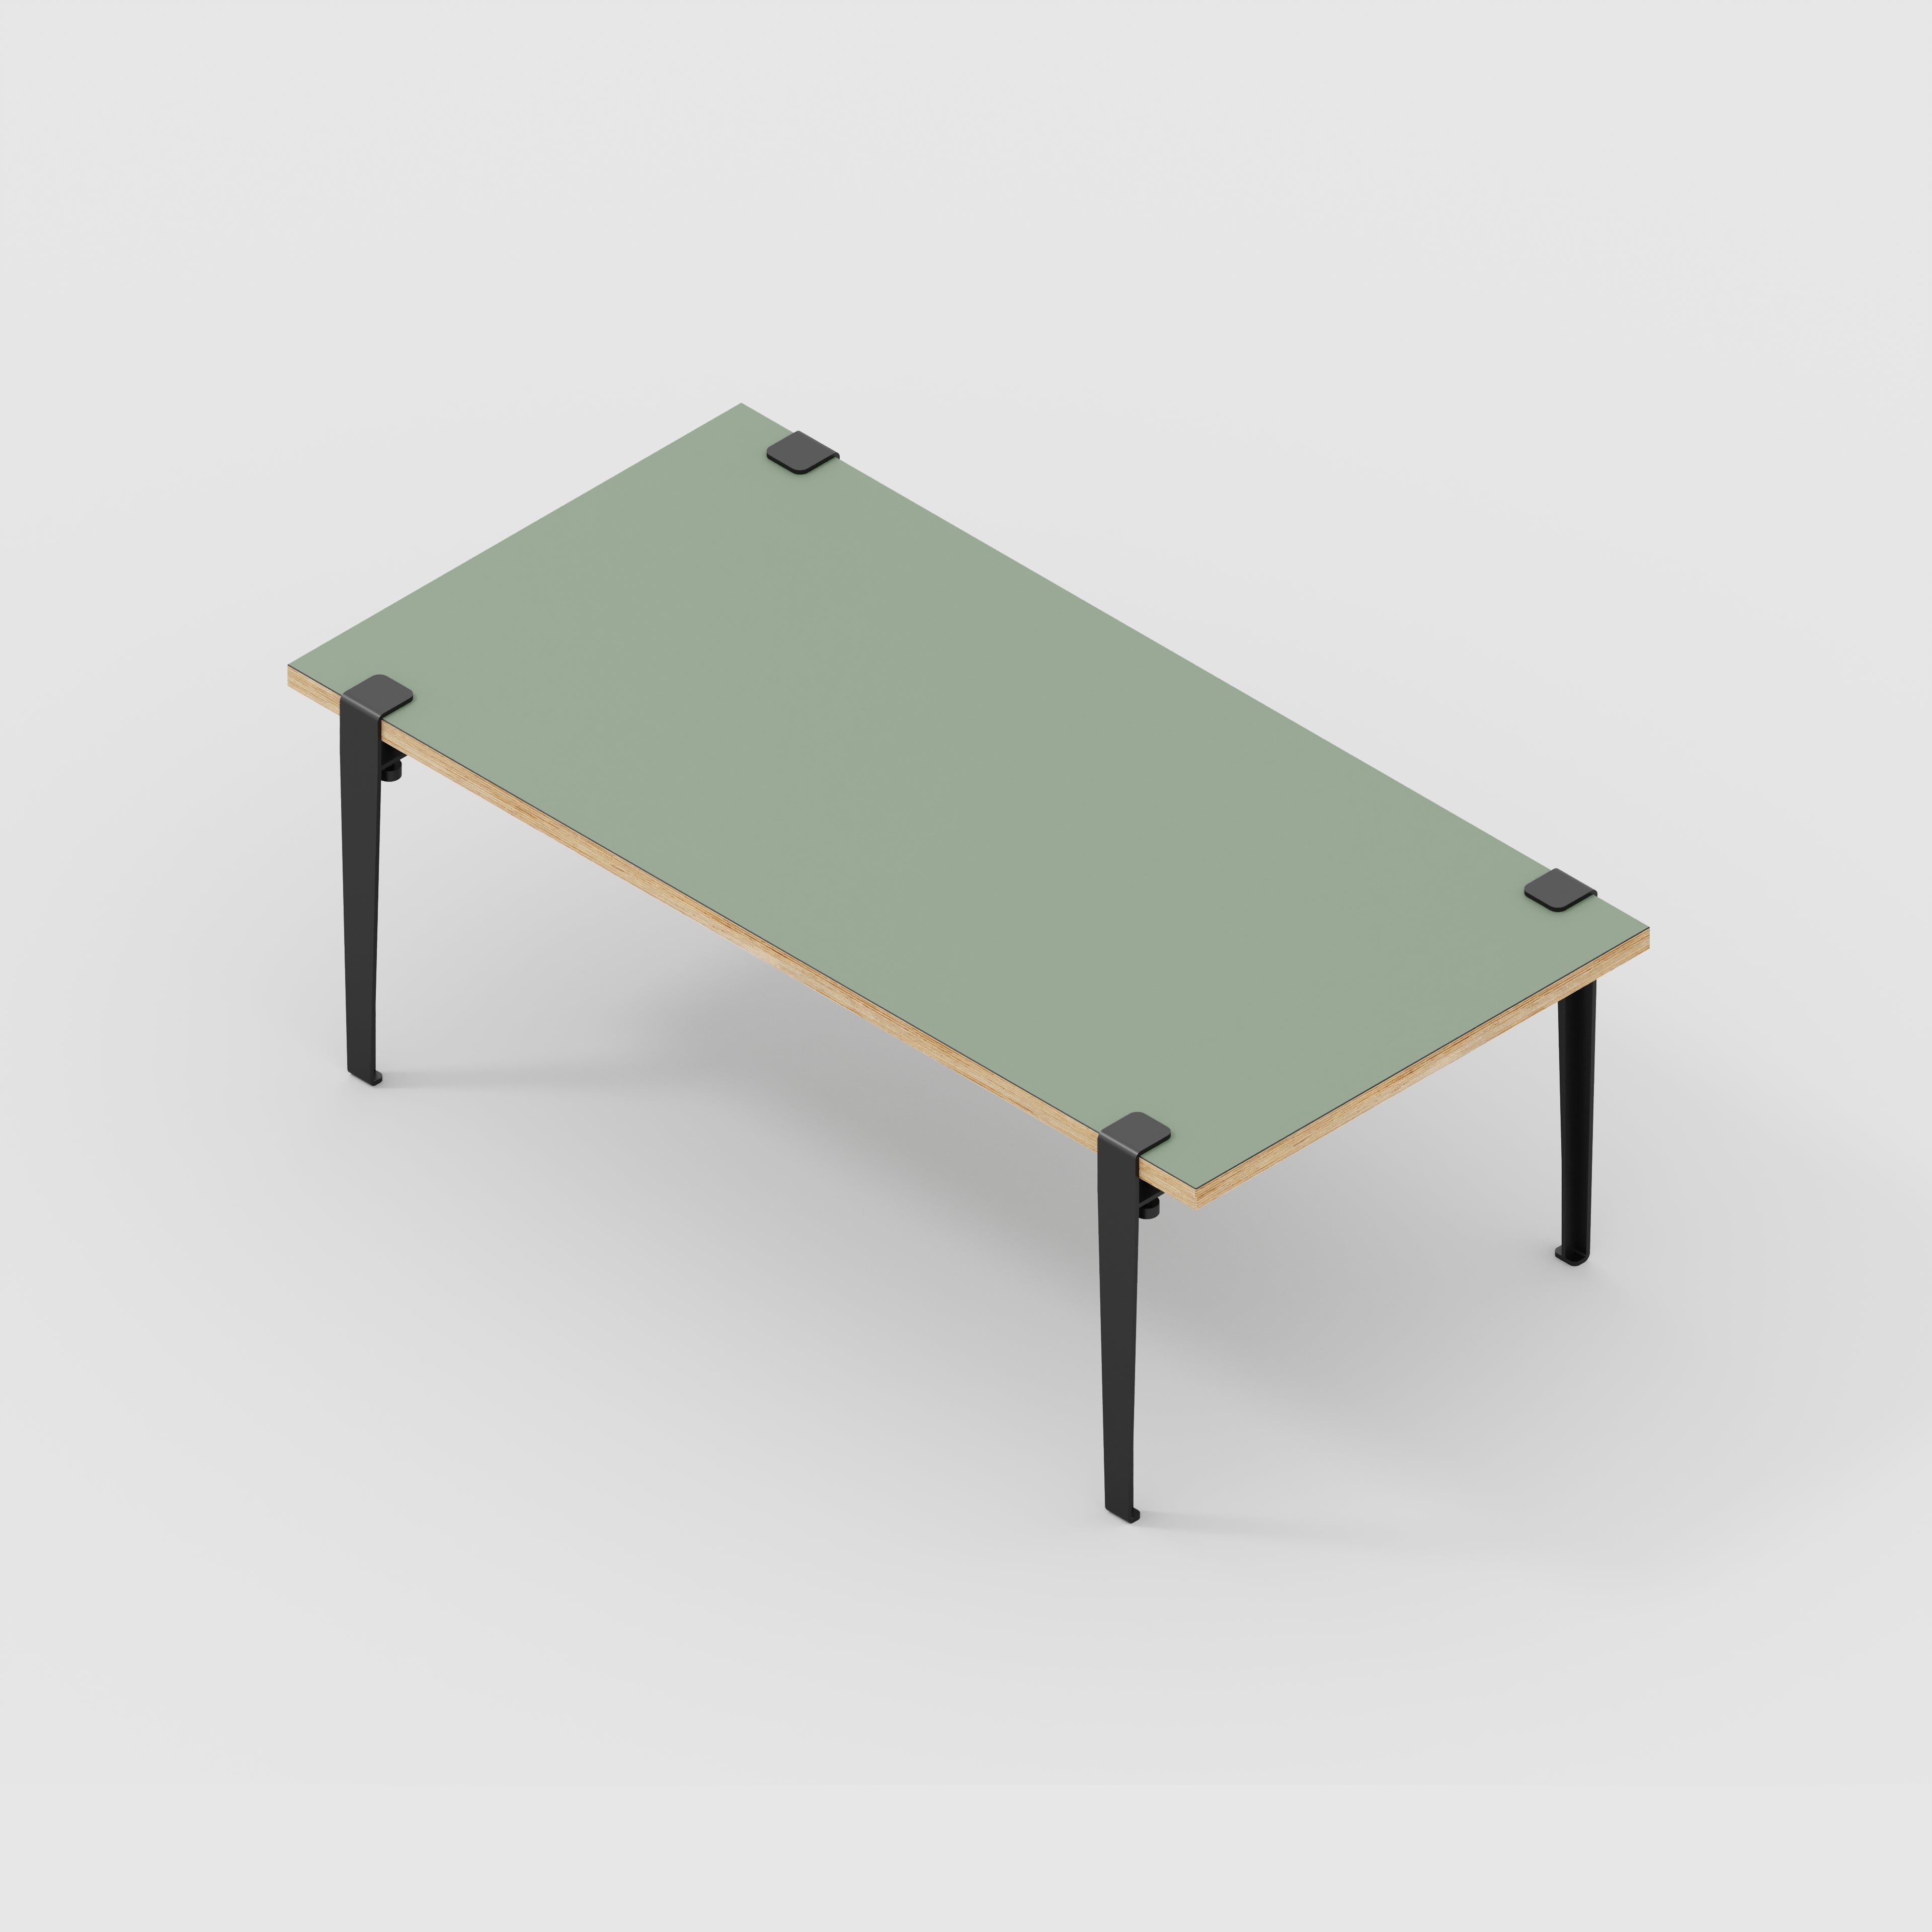 Coffee Table with Black Tiptoe Legs - Formica Green Slate - 1200(w) x 600(d) x 430(h)